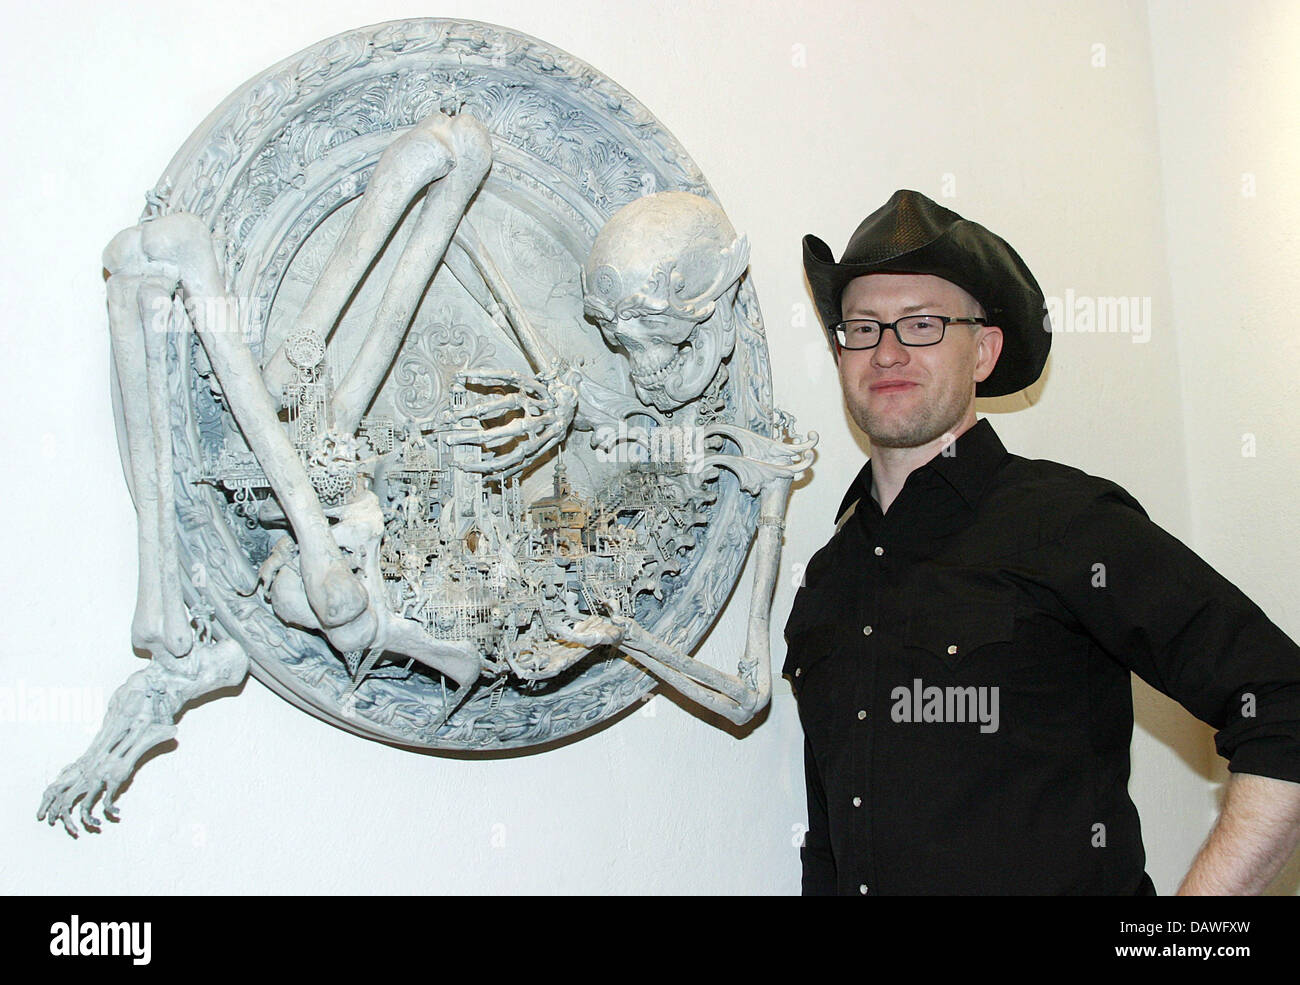 US artist Kris Kuksi pictured with oine of his works at the Strychnin Gallery in Berlin, Germany, 13 April 2007. He presents his works ranging in price from 2,500 to 5,500 euro under the theme 'Lost Worlds'. Photo: Xamax Stock Photo